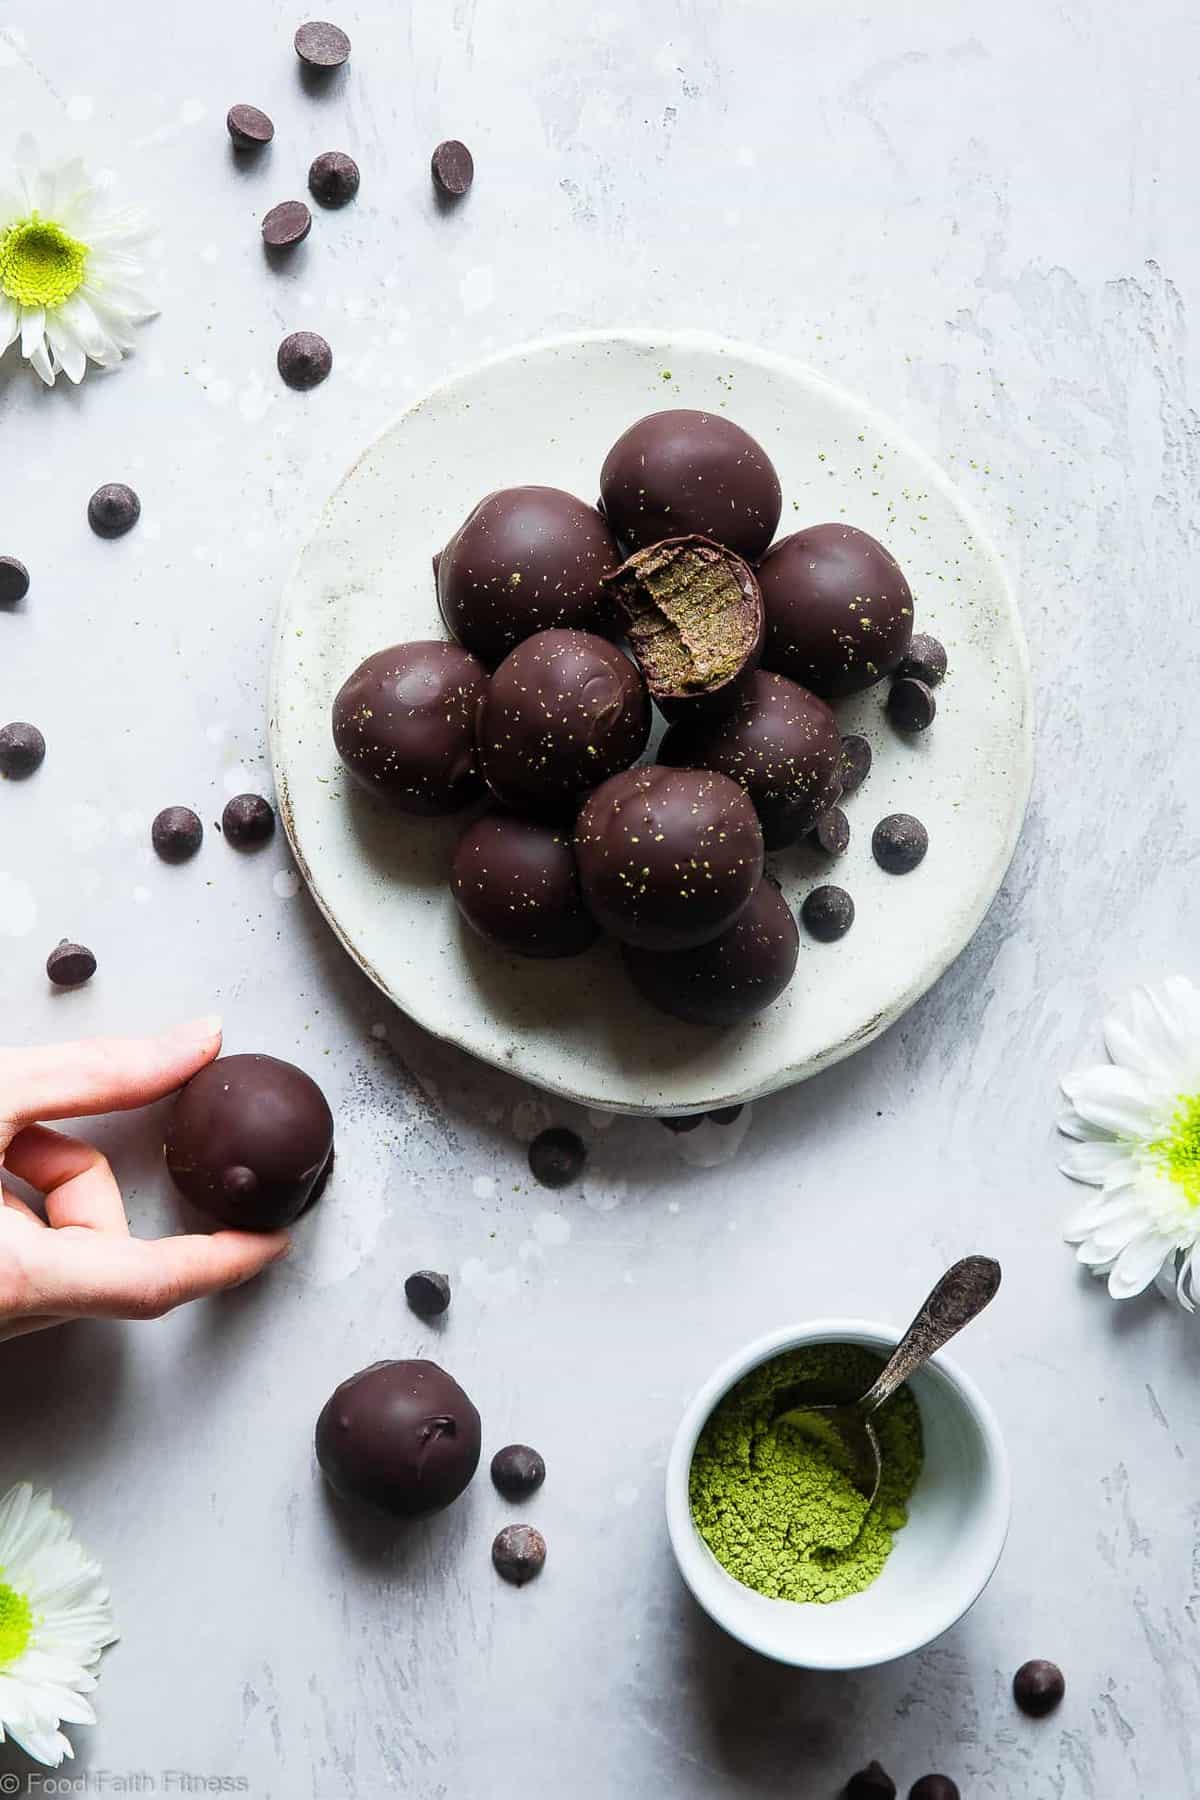 5 Ingredient No Bake Matcha Energy Protein Balls - Quick, easy and gluten/grain/dairy free and paleo and vegan friendly ! A healthy, protein packed snack that is great for kids and adults! | #Foodfaithfitness | #Vegan #Paleo #Glutenfree #Healthy #Energyballs